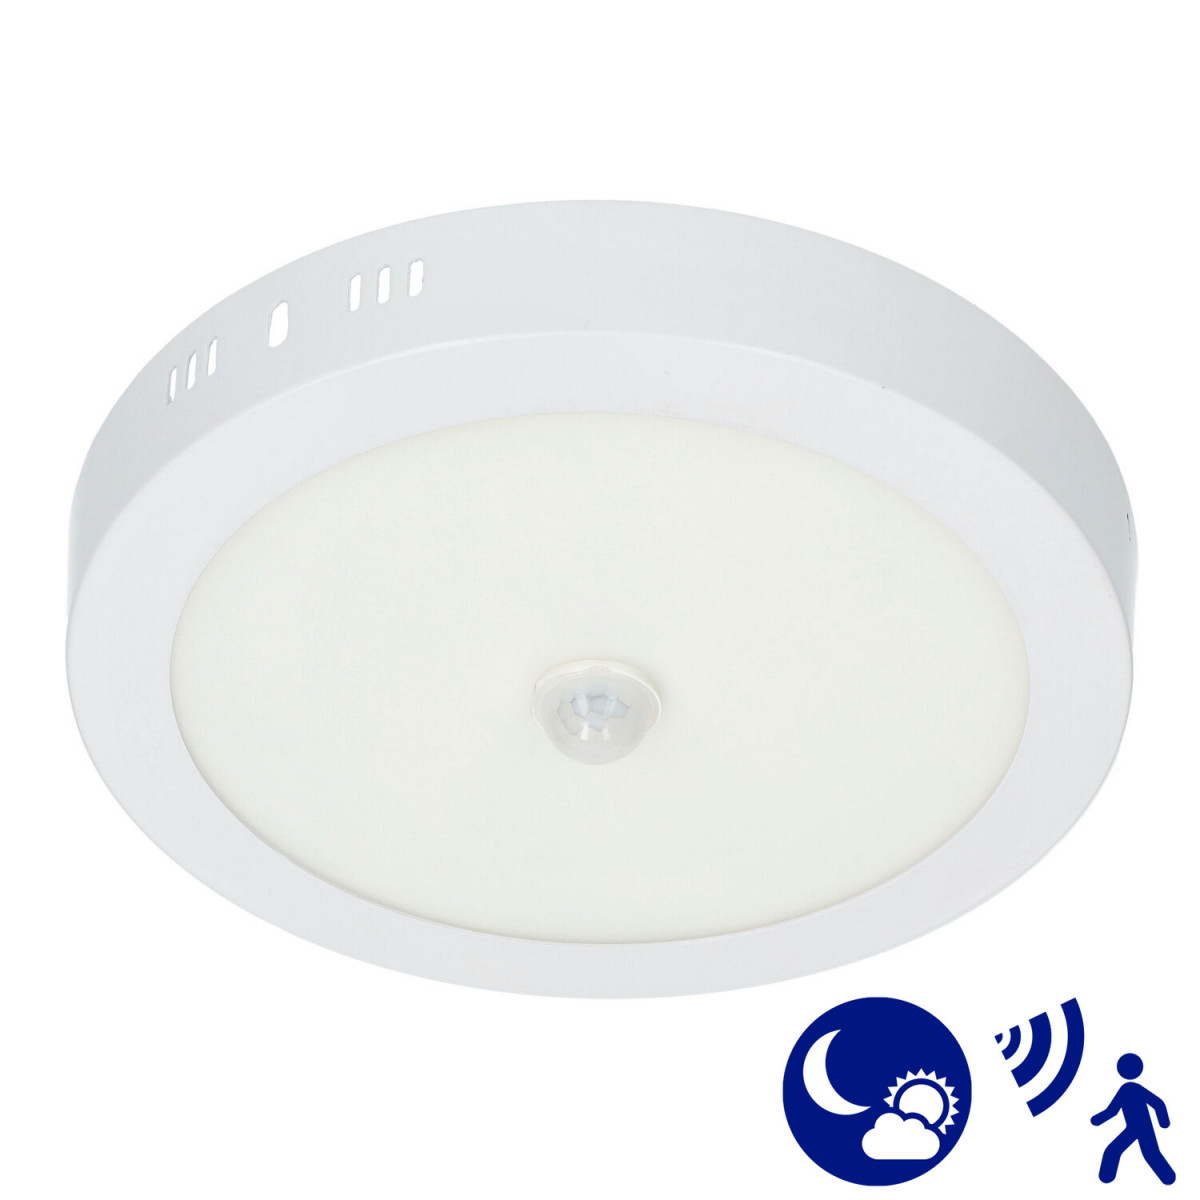 Ceiling Light - 18W, Night Function Presence Detector